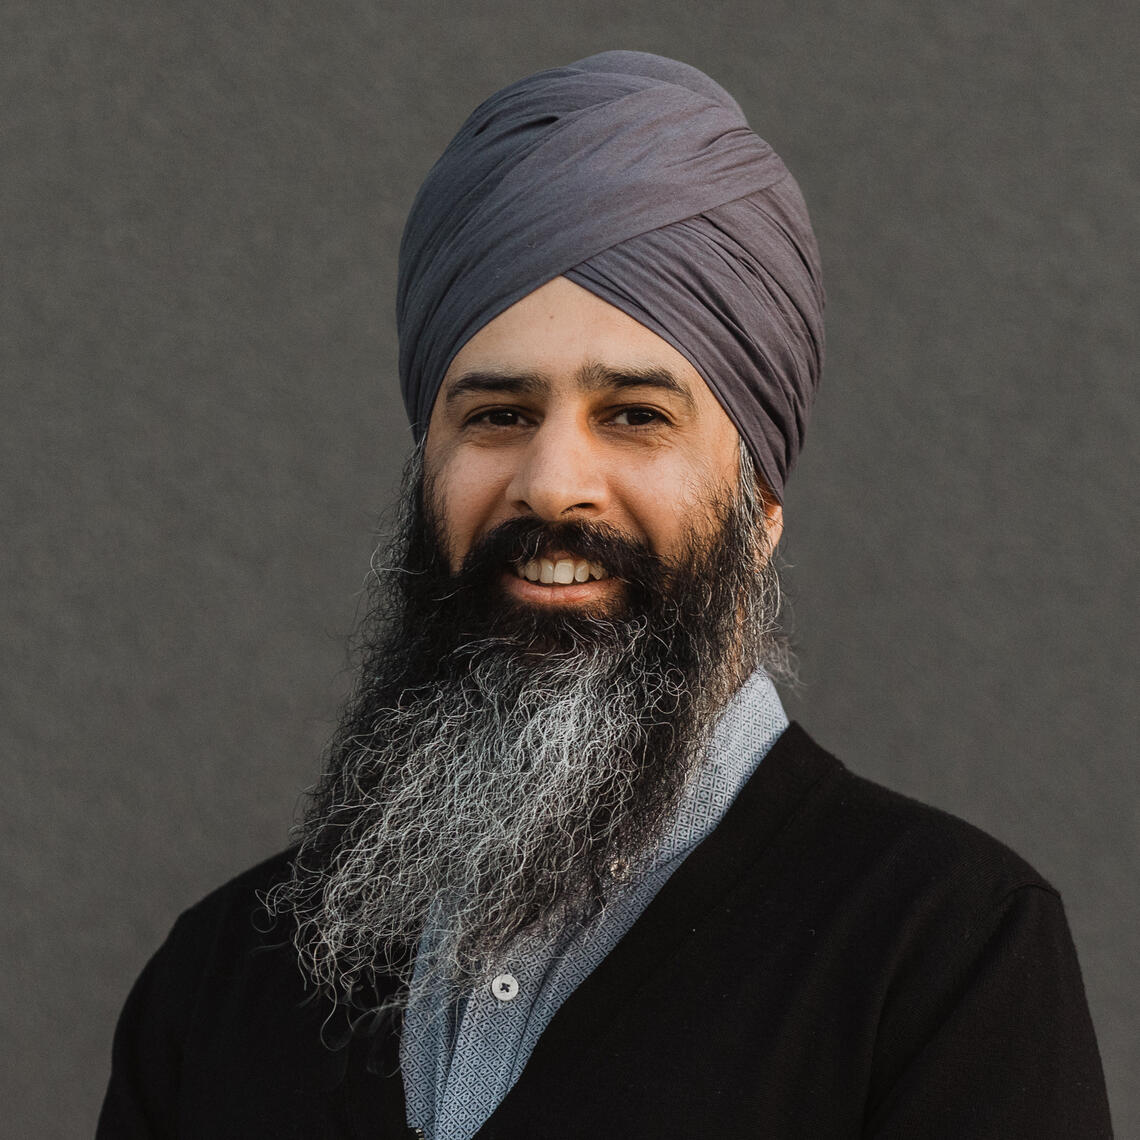 Harjeet Grewal is a sessional instructor teaching Sikh studies classes at UCalgary